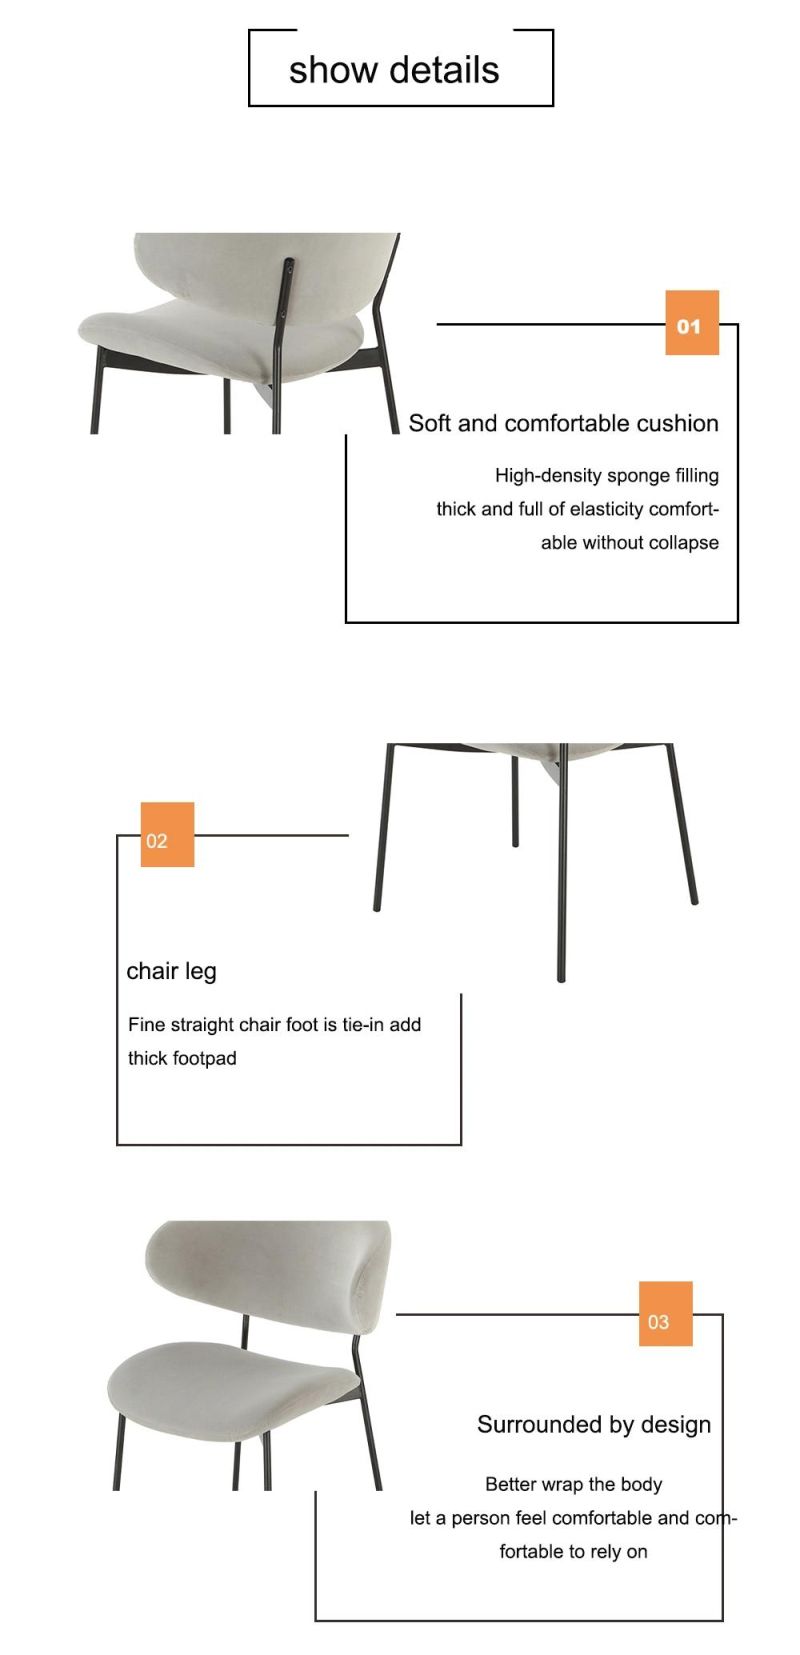 Wholesale Fabric Dining Chair Modern Dining Room Furniture Metal Nordic Dining Chair